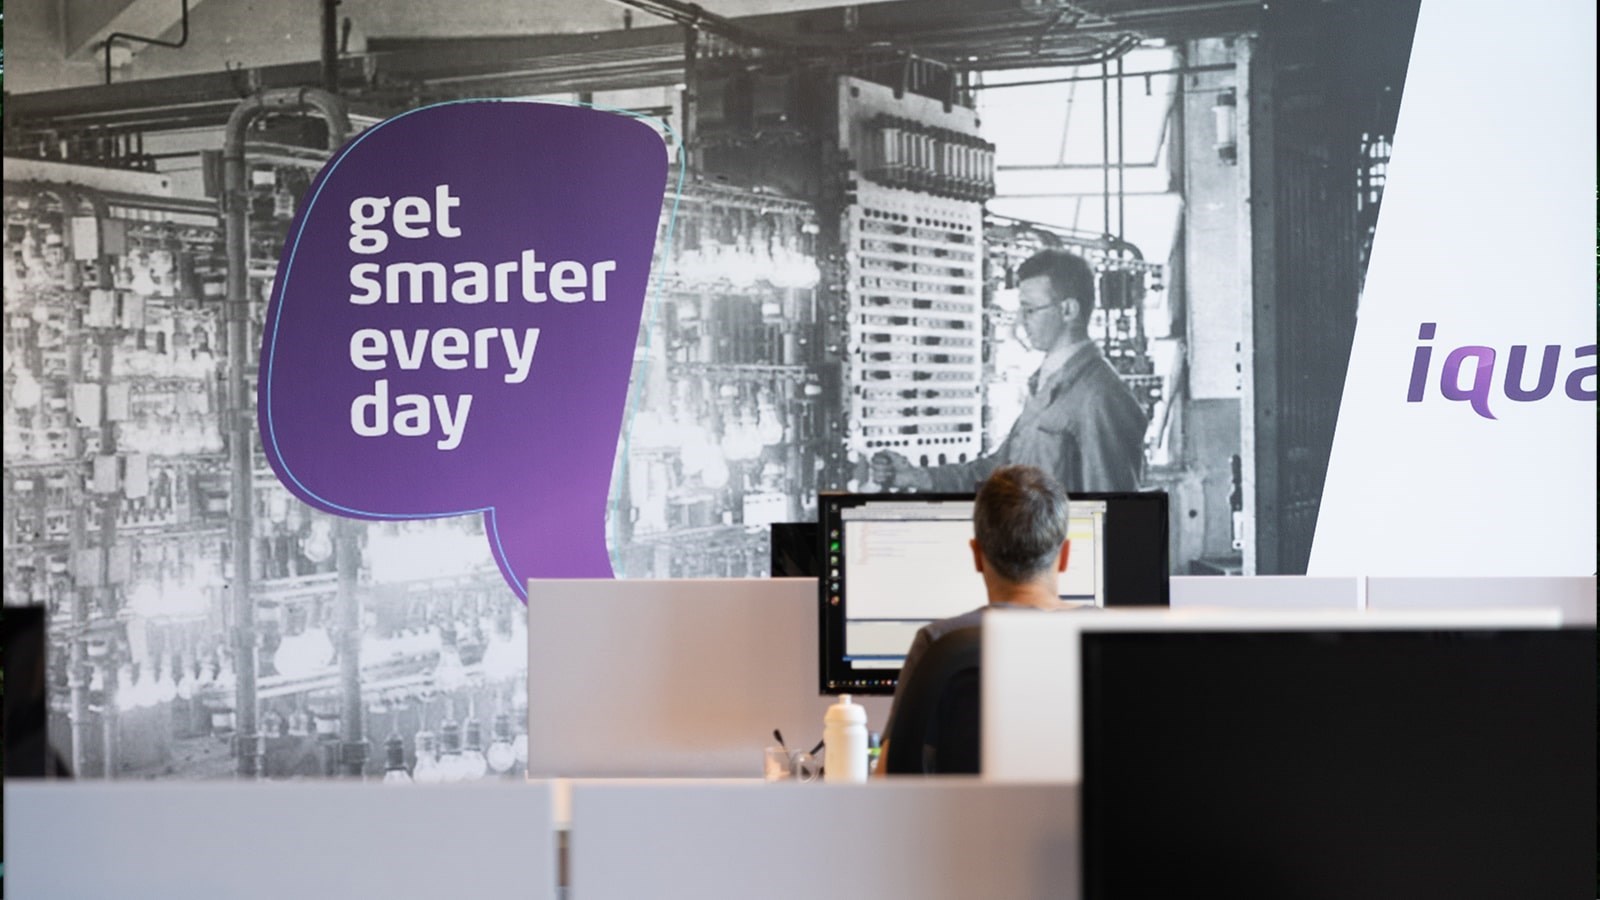 image of get smarter everyday office.